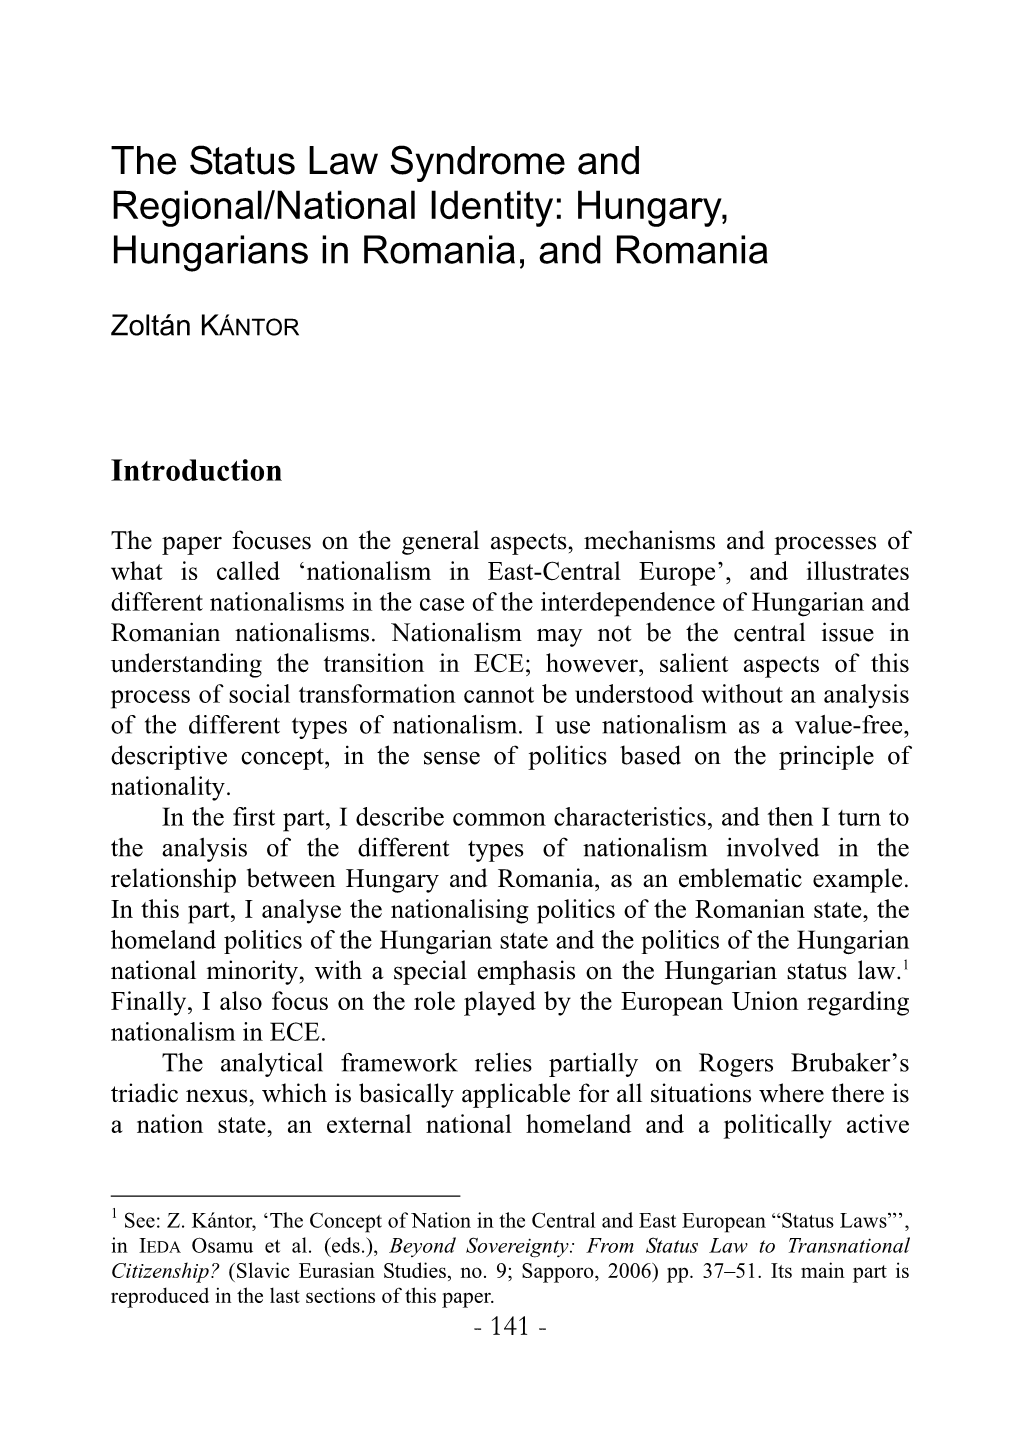 The Status Law Syndrome and Regional/National Identity: Hungary, Hungarians in Romania, and Romania